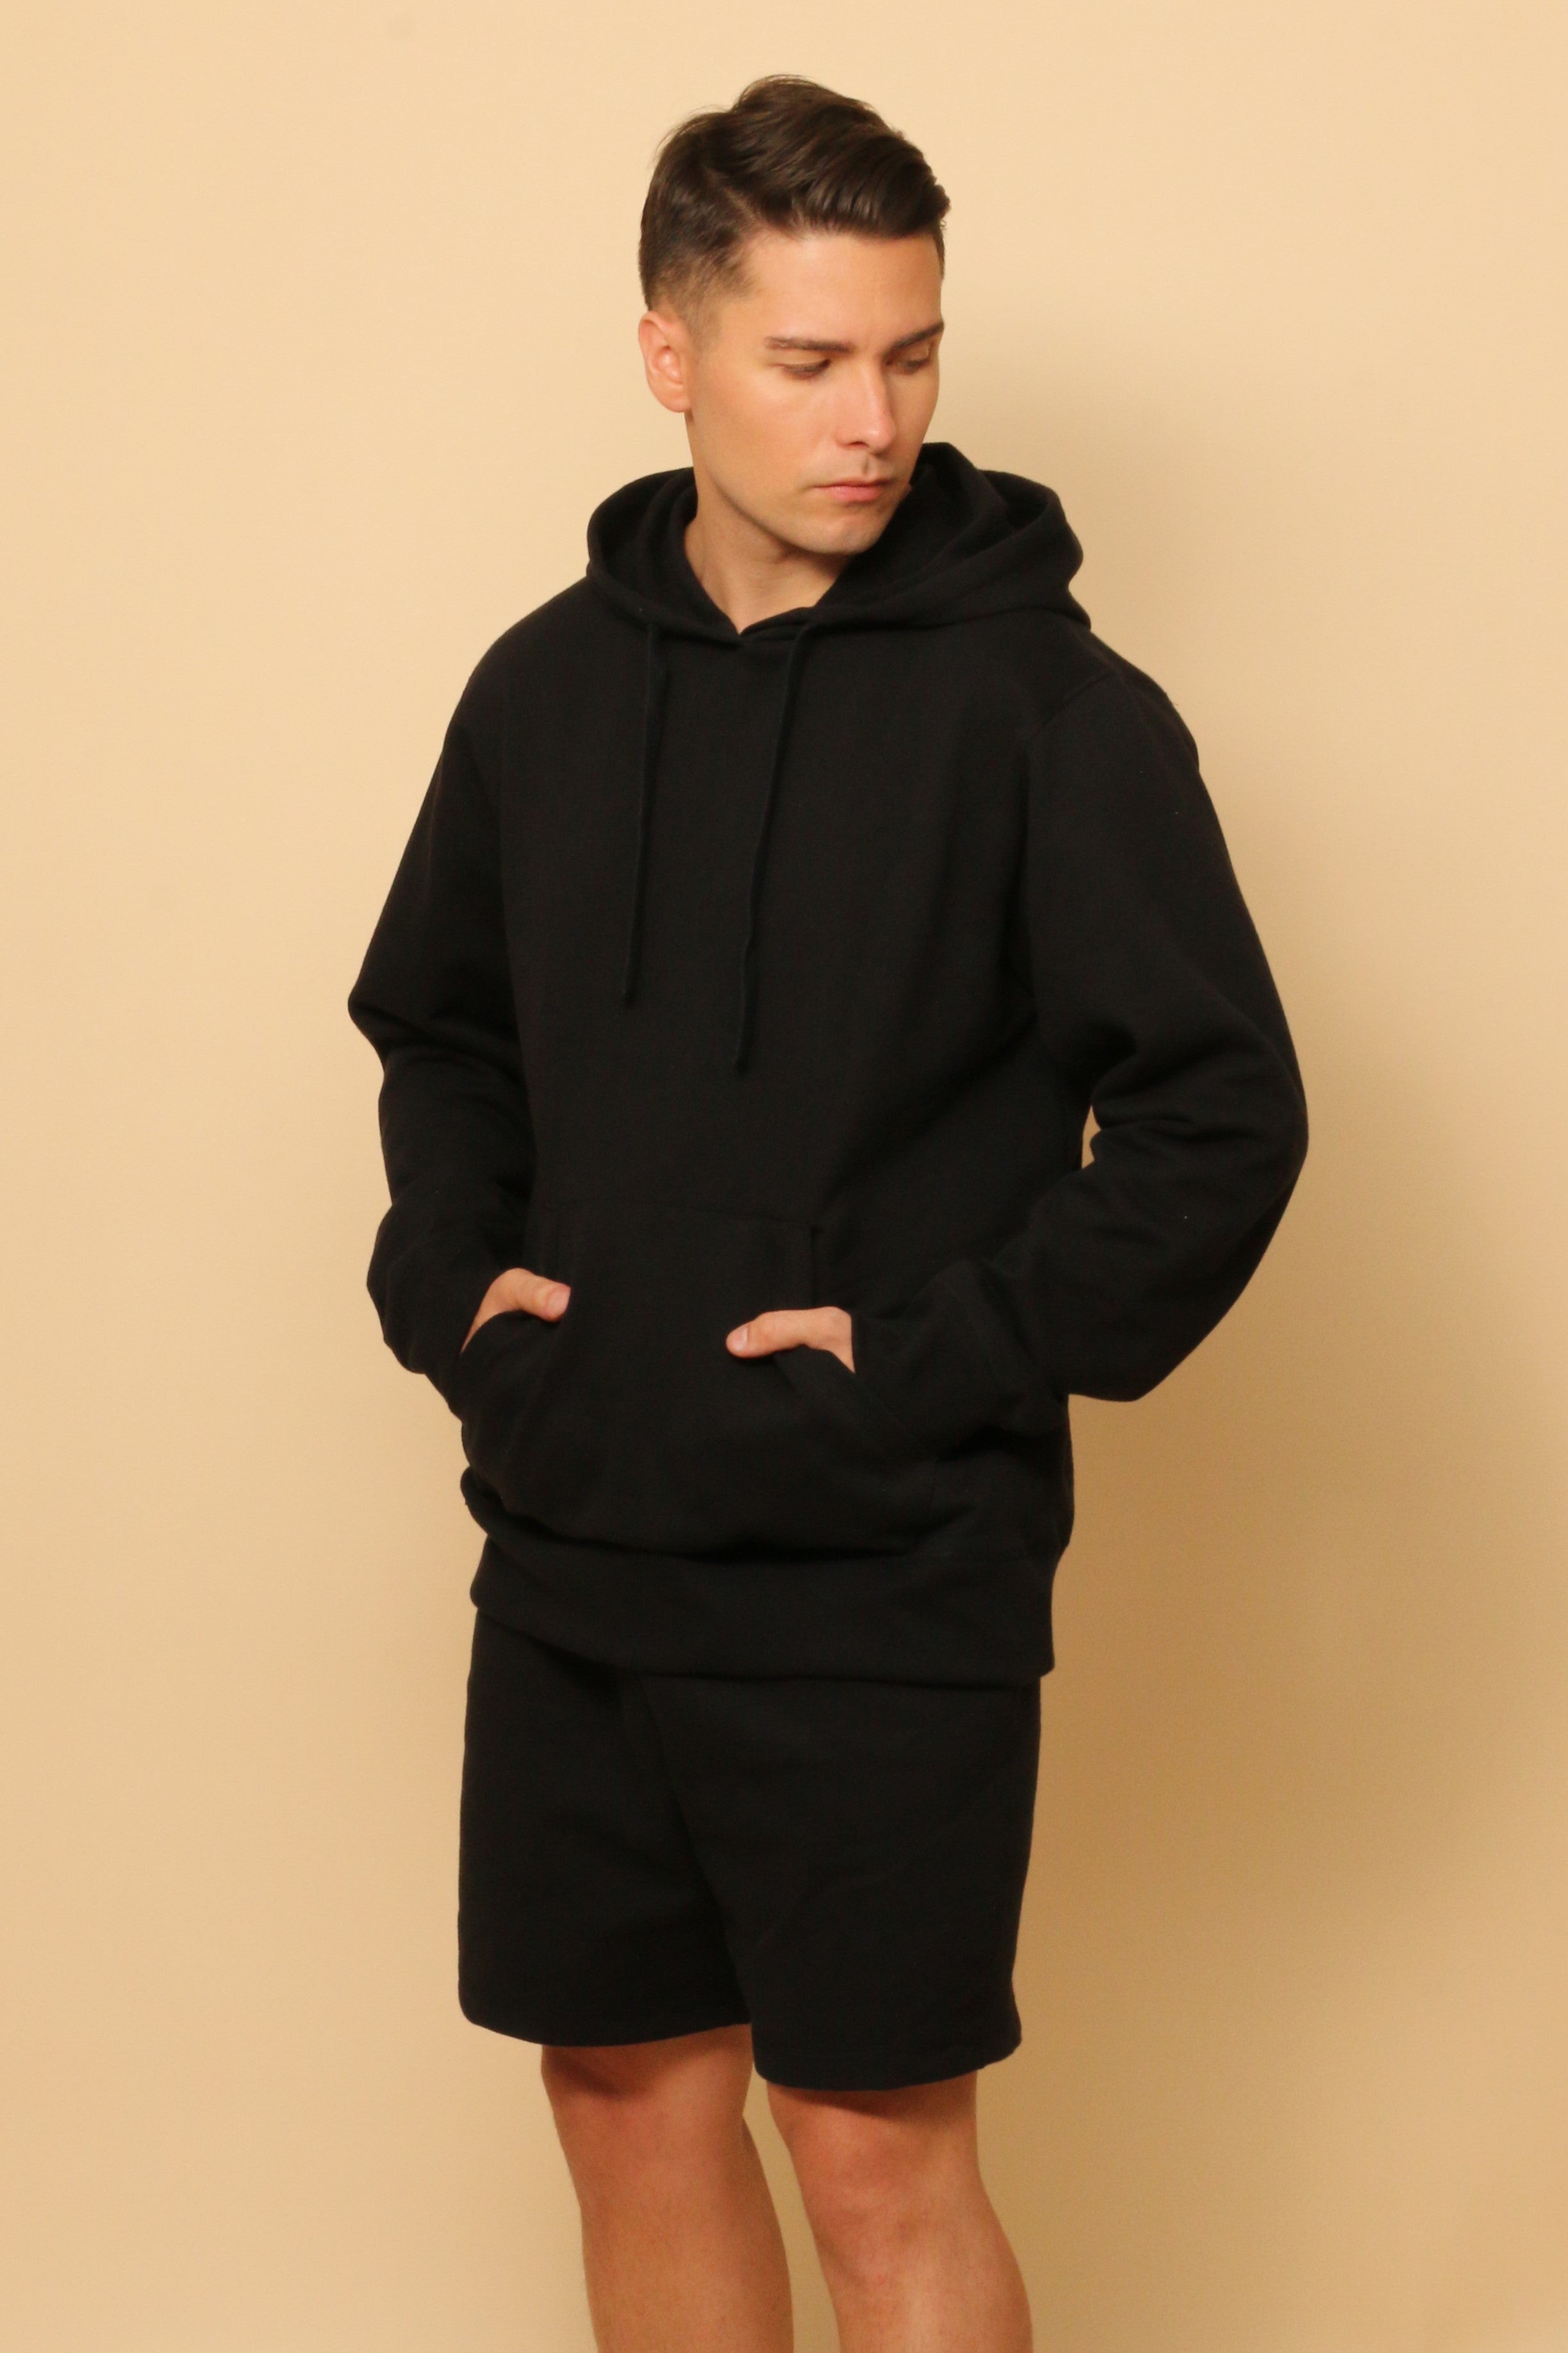 Men's Allergy-Free French Terry Hoodie